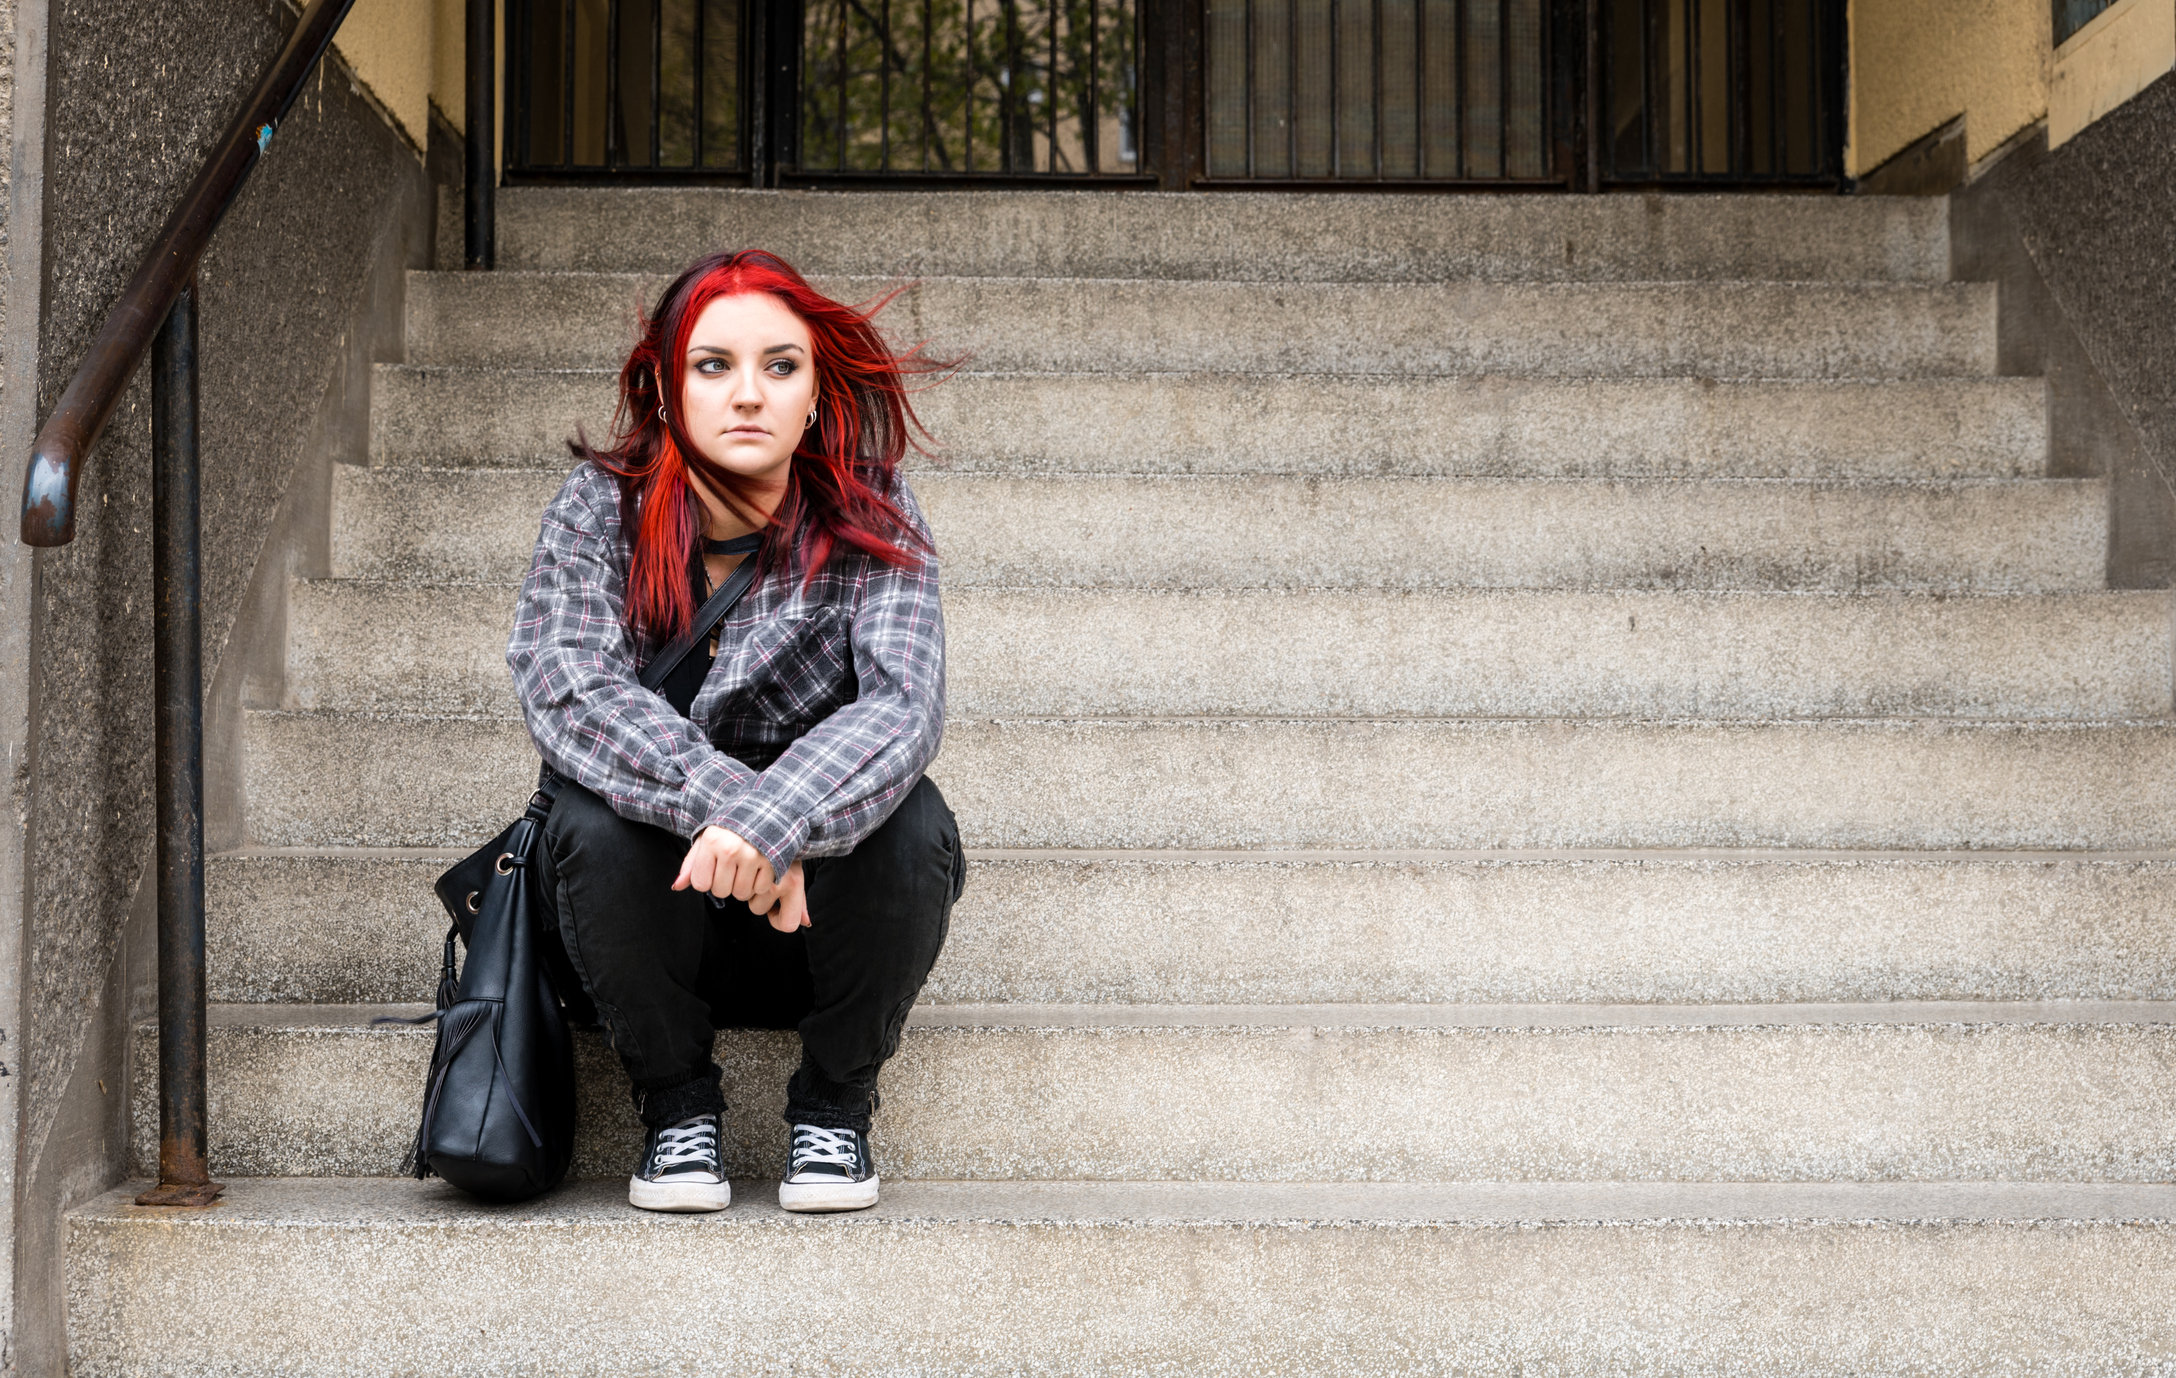 A teen girl sits on outdoor stairs with a bag.